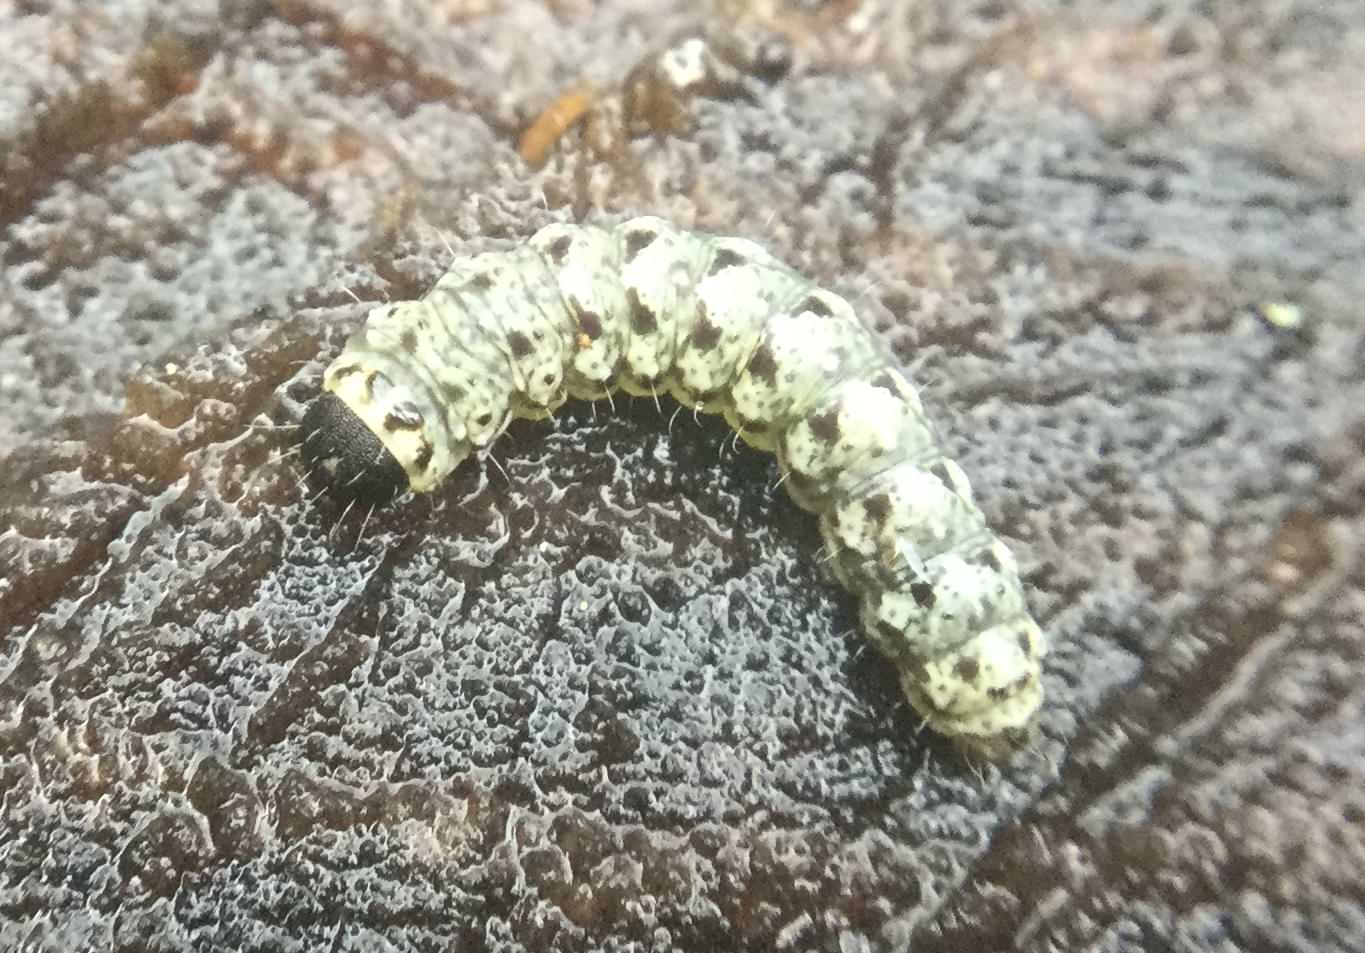 A small pale-green caterpillar with a few dark markings on its body. Its head is black and has a rough leather-like texture.